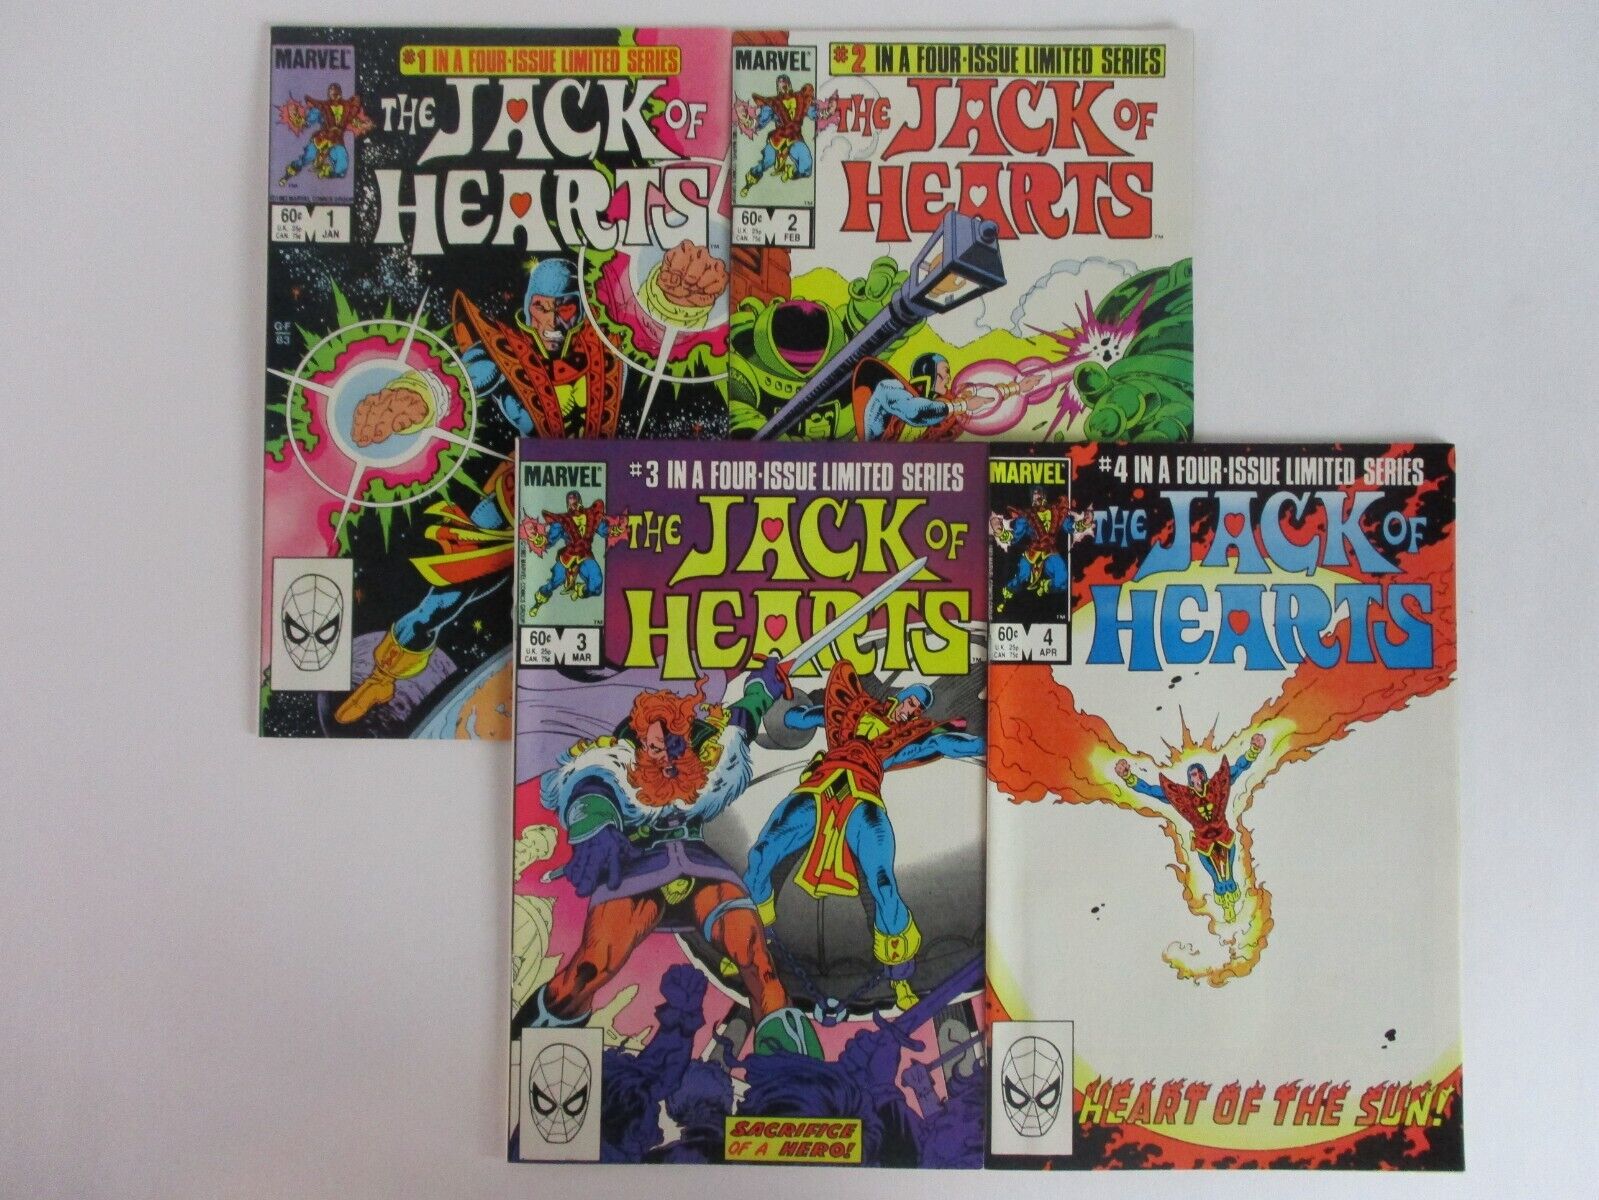 Marvel Comics THE JACK OF HEARTS #1-4 Complete Limited Series 1983 LOOKS GREAT